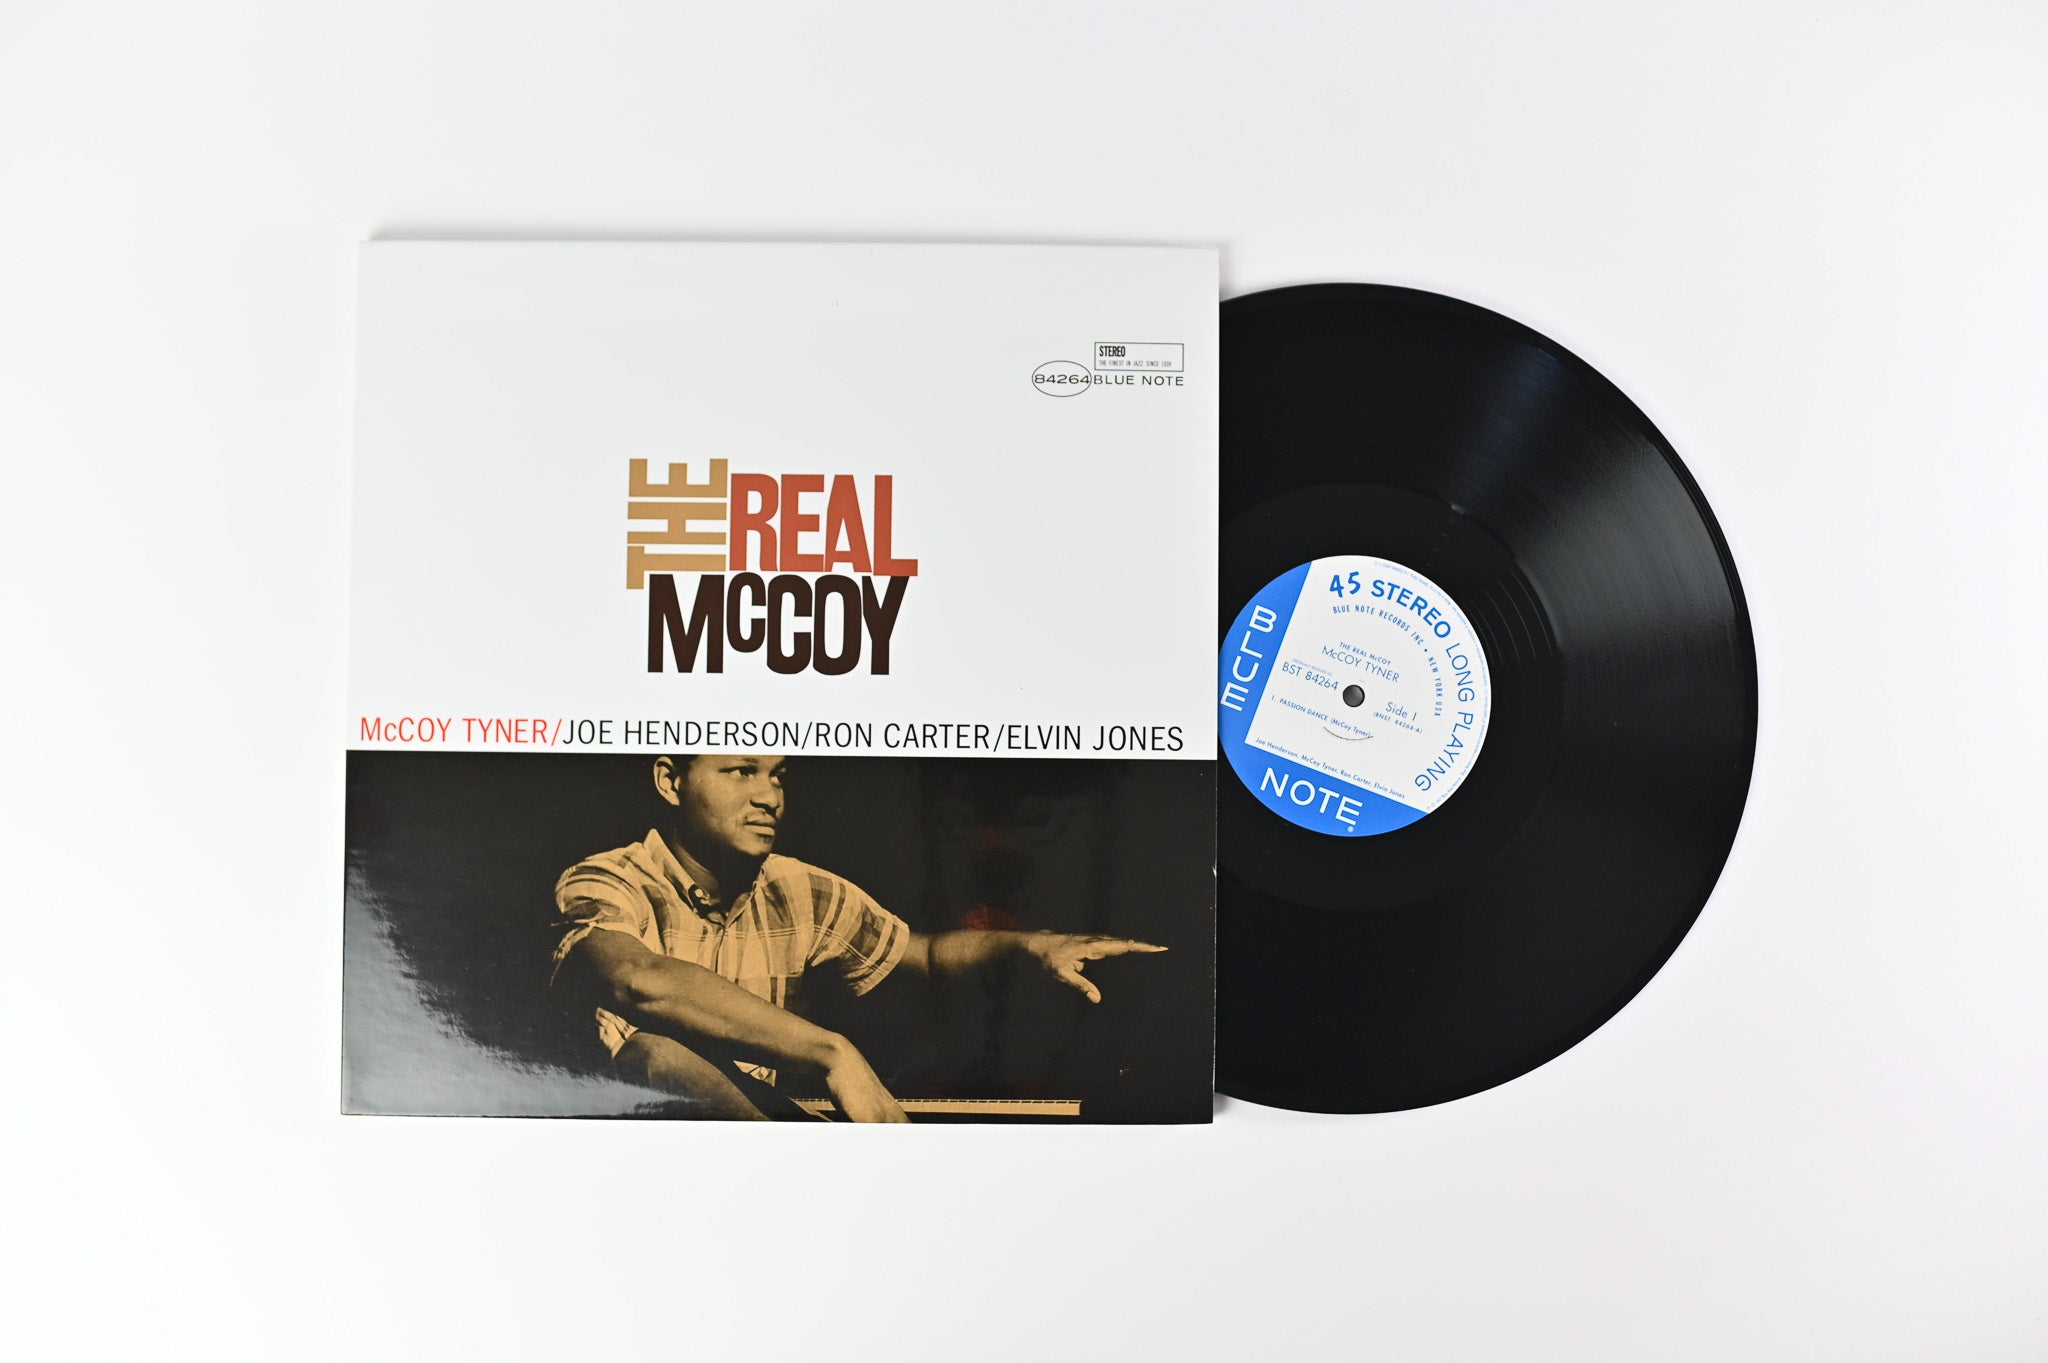 McCoy Tyner - The Real McCoy on Blue Note Music Matters Ltd Numbered Reissue 45 RPM